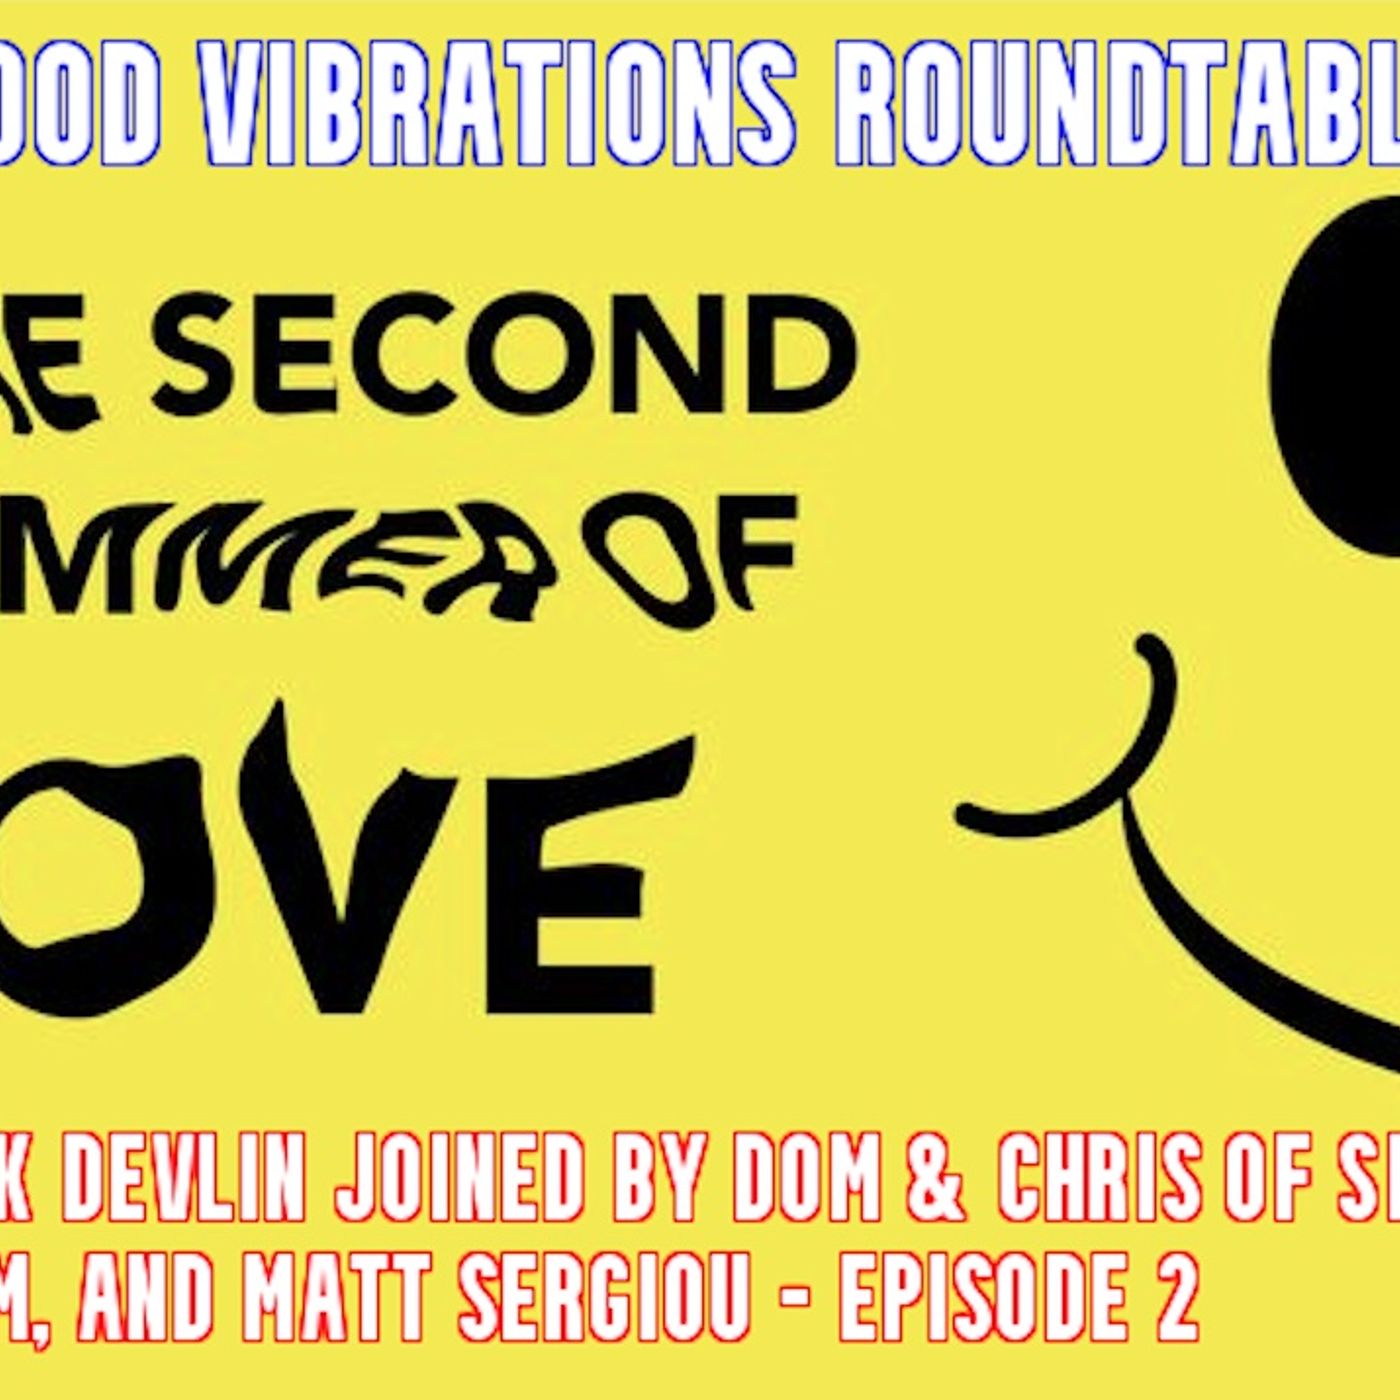 Good Vibrations Podcast: Second Summer of Love Roundtable - Episode 2